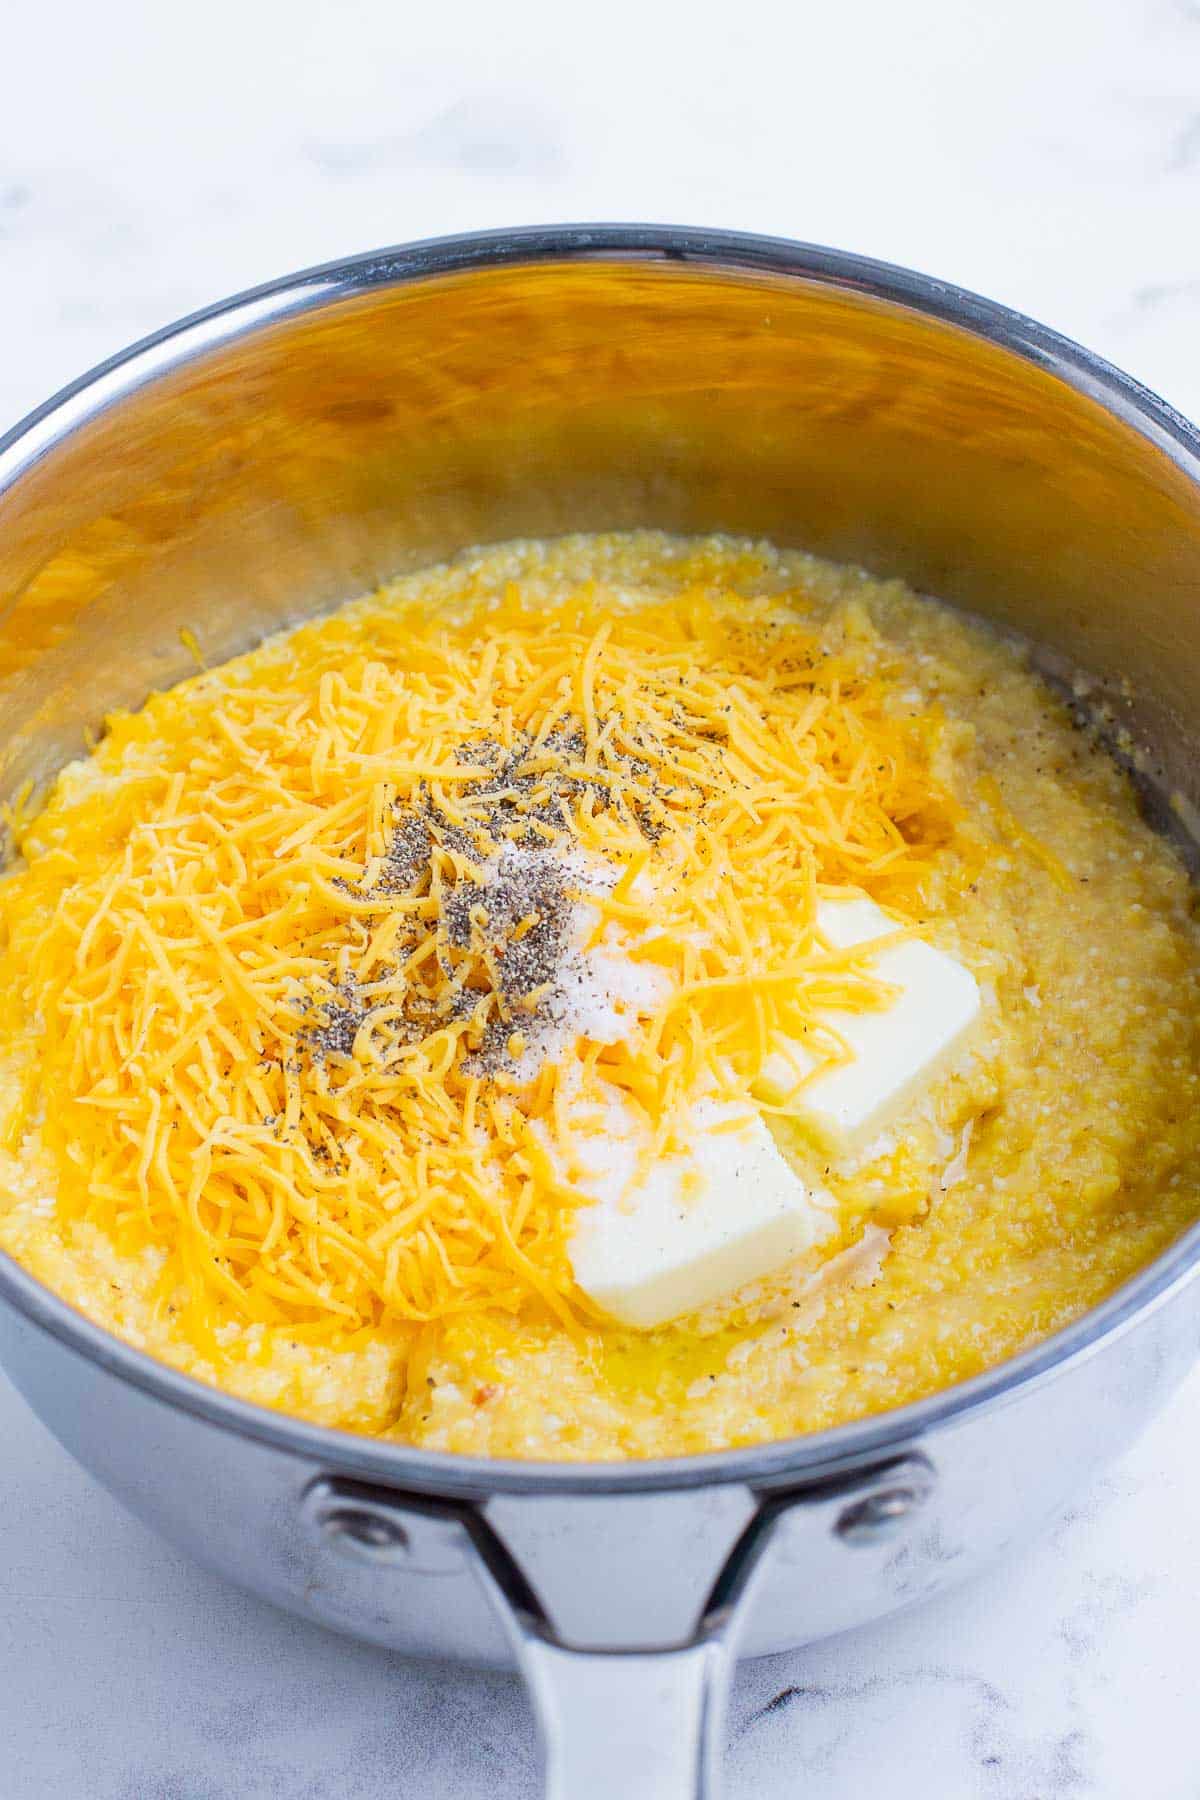 Grits ingredients are cooked in a saucepan.